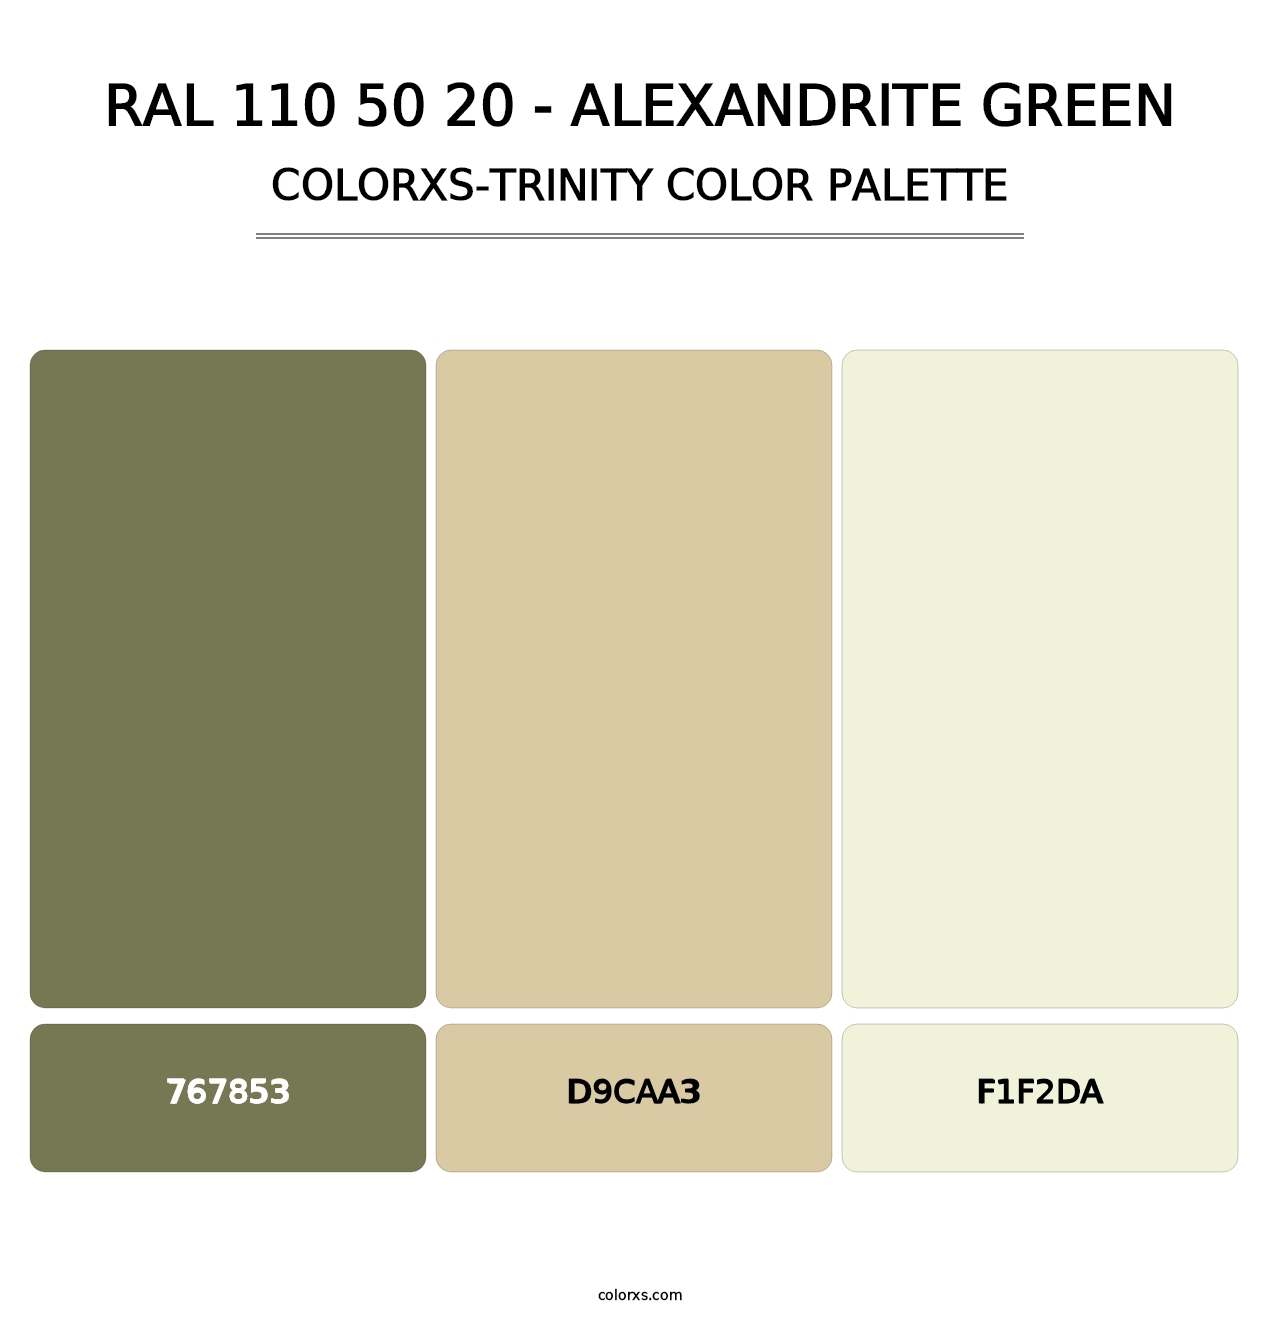 RAL 110 50 20 - Alexandrite Green - Colorxs Trinity Palette